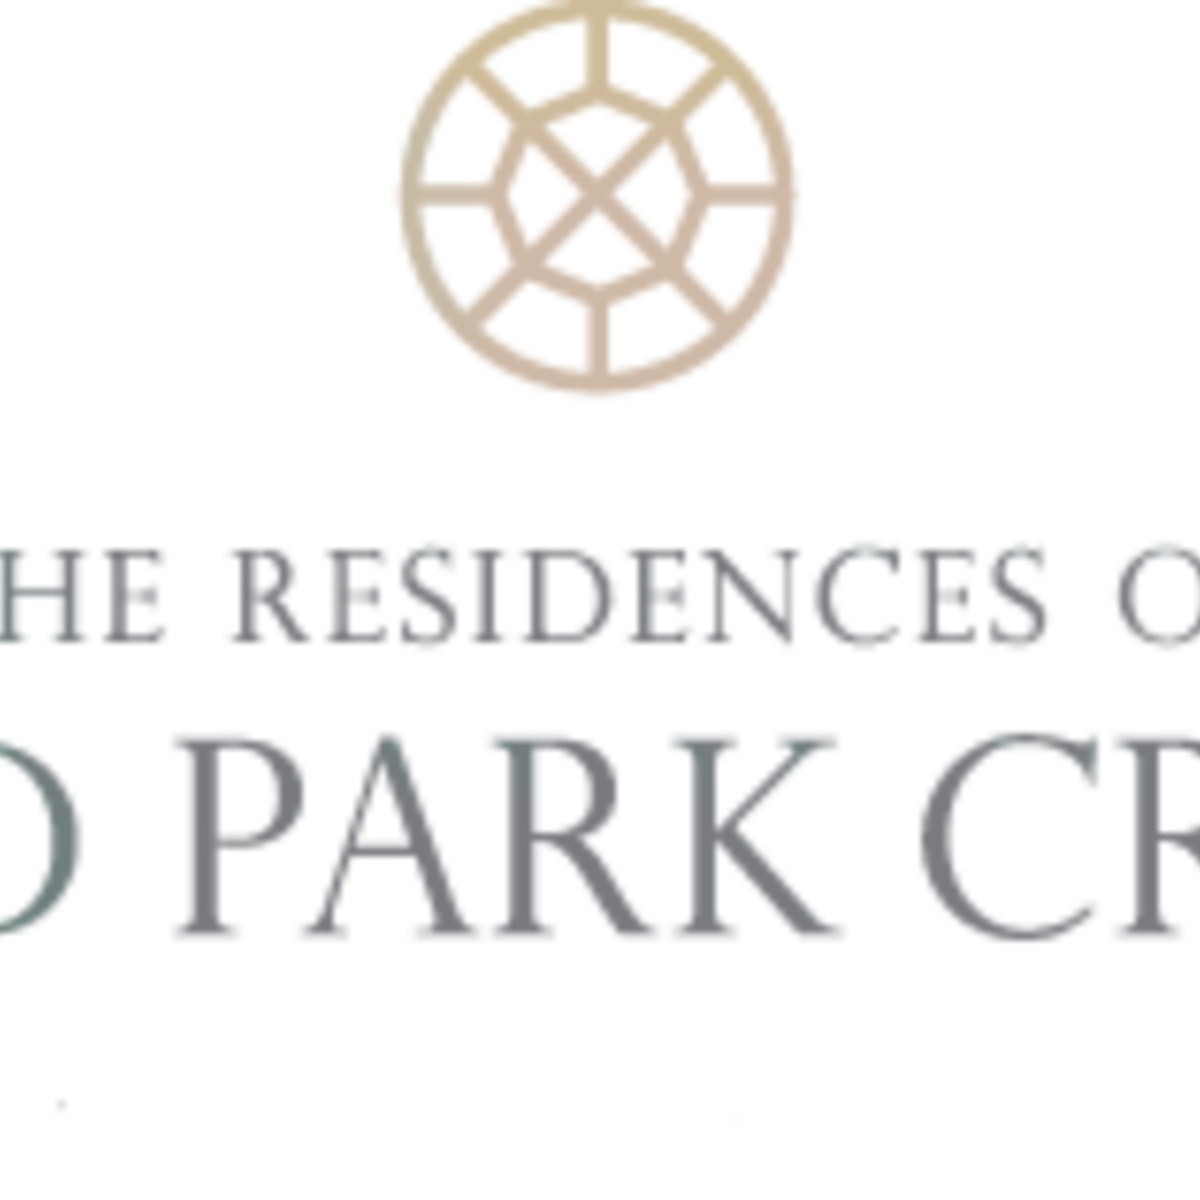 The Residences of Orland Park Crossing